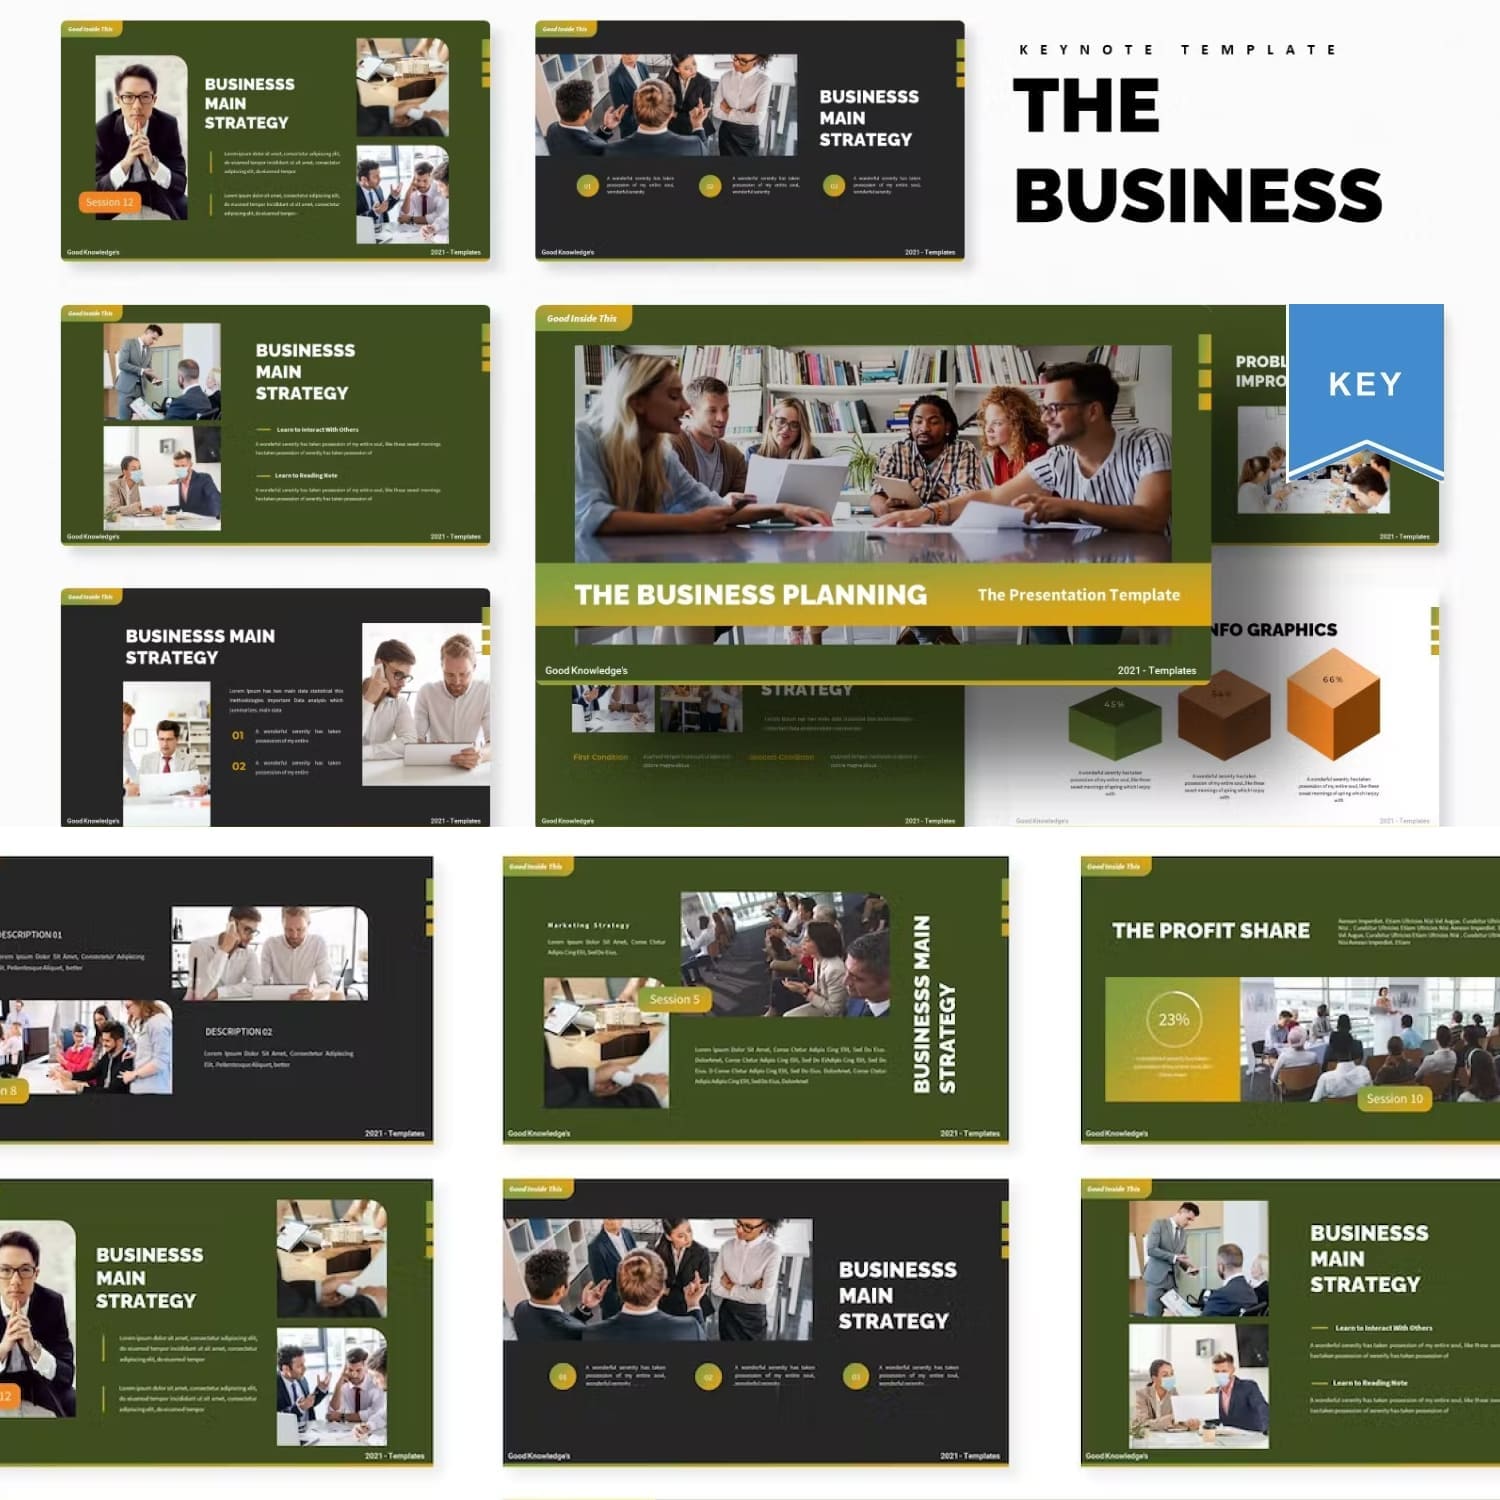 The Business Planning, Keynote Template, Picture 1500x1500.